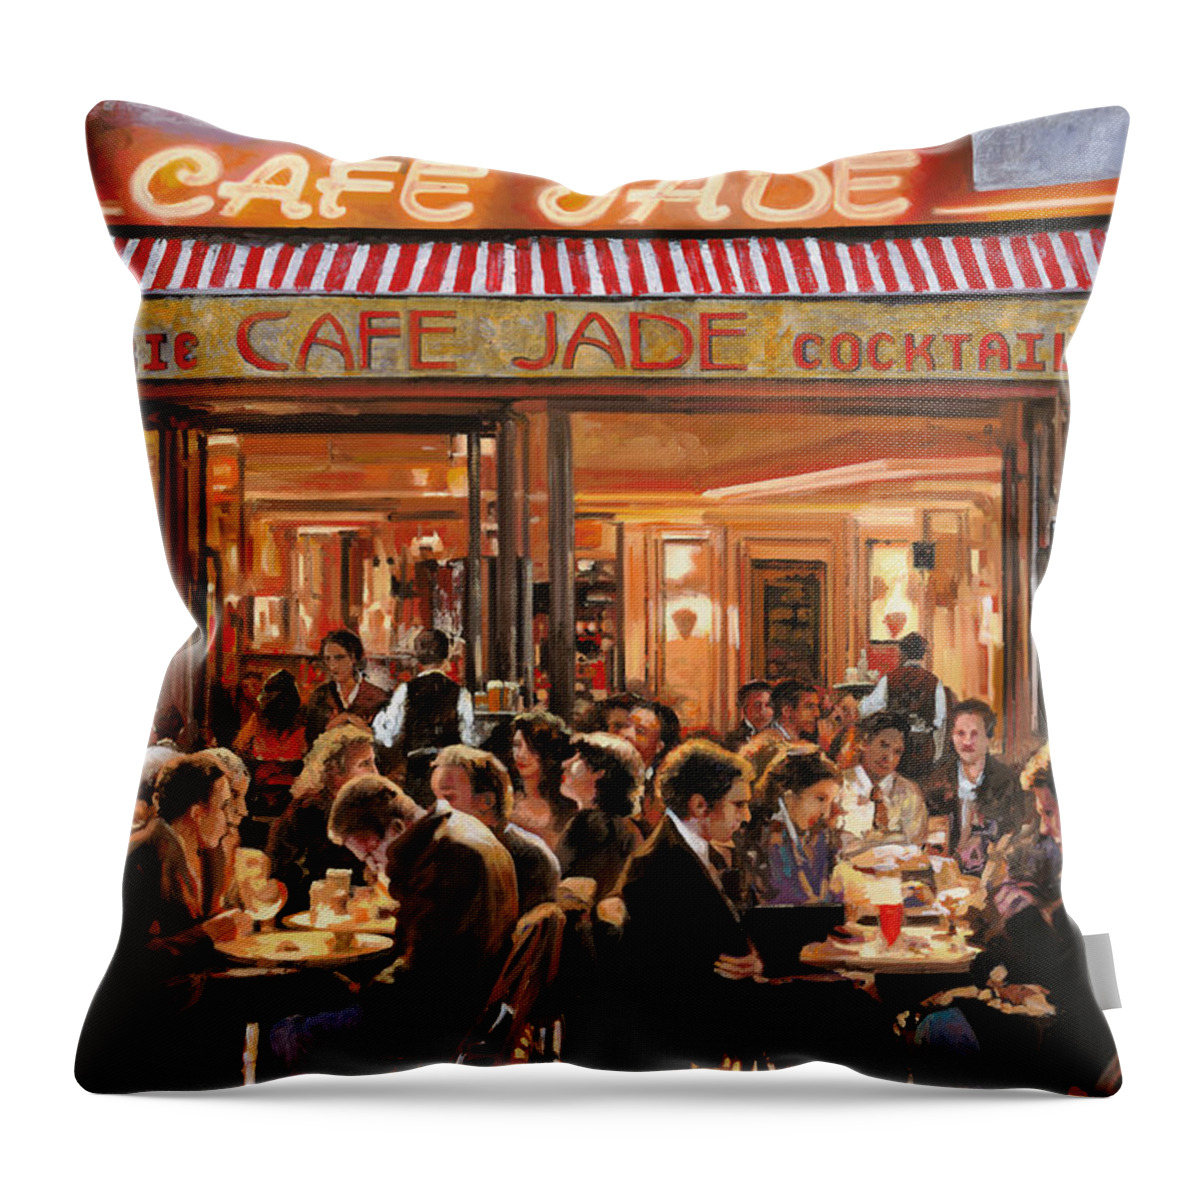 Brasserie Throw Pillow featuring the painting Cafe Jade by Guido Borelli